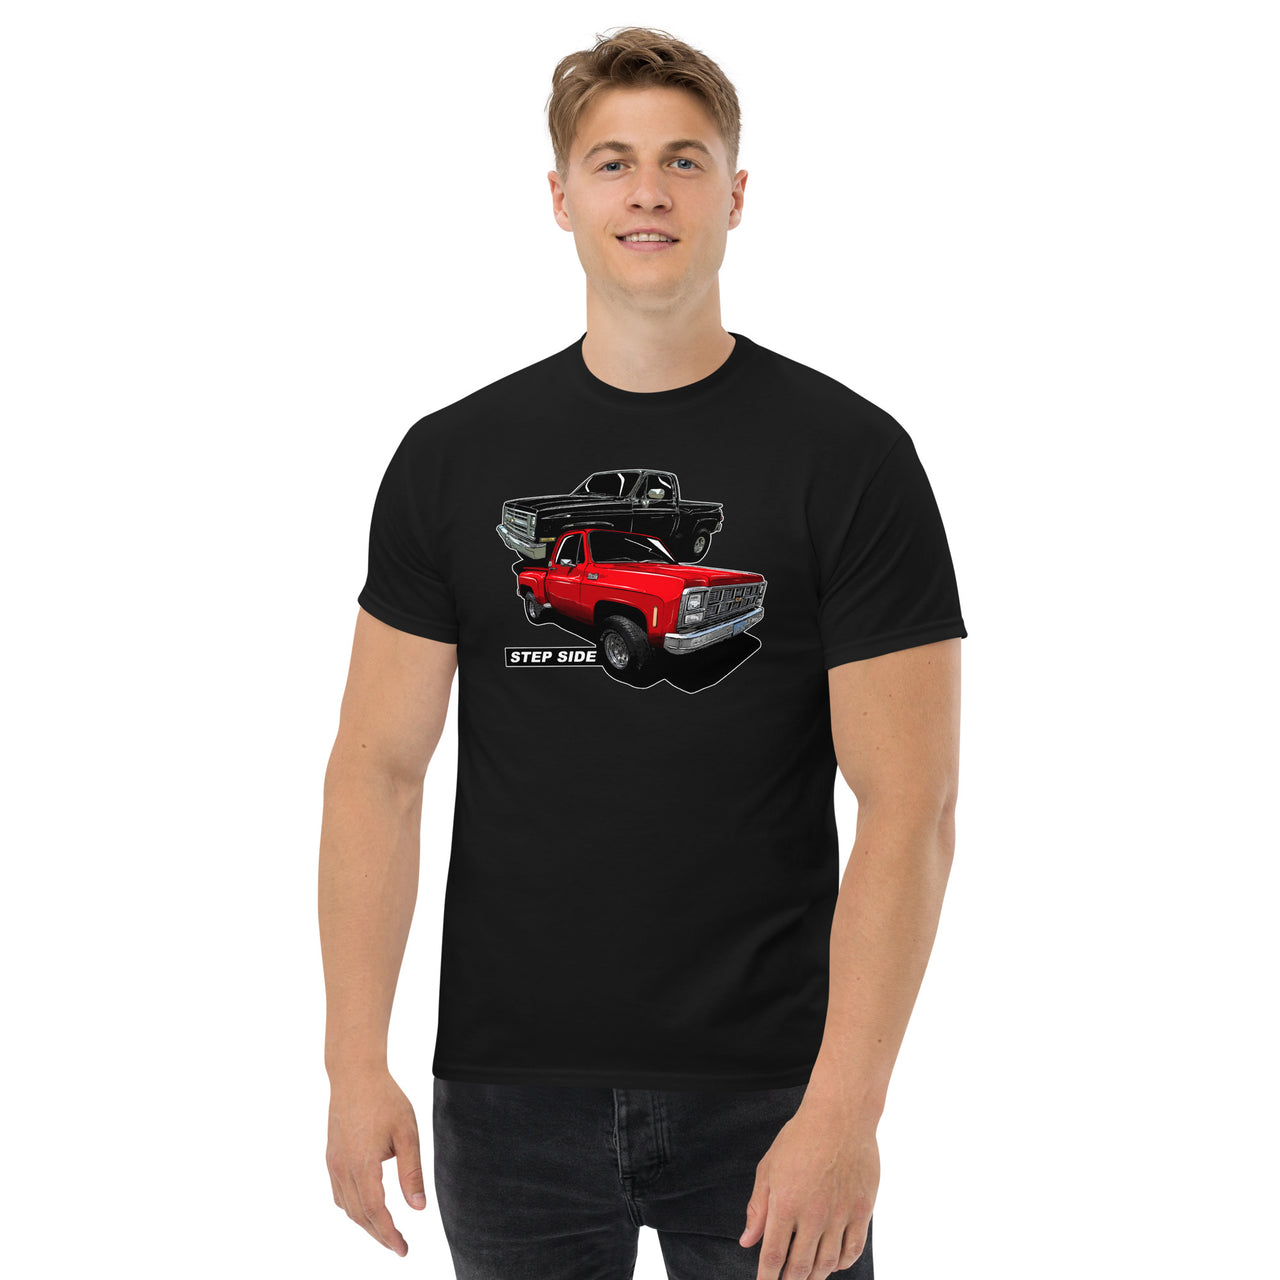 Square Body Step-Side T-Shirt modeled in black